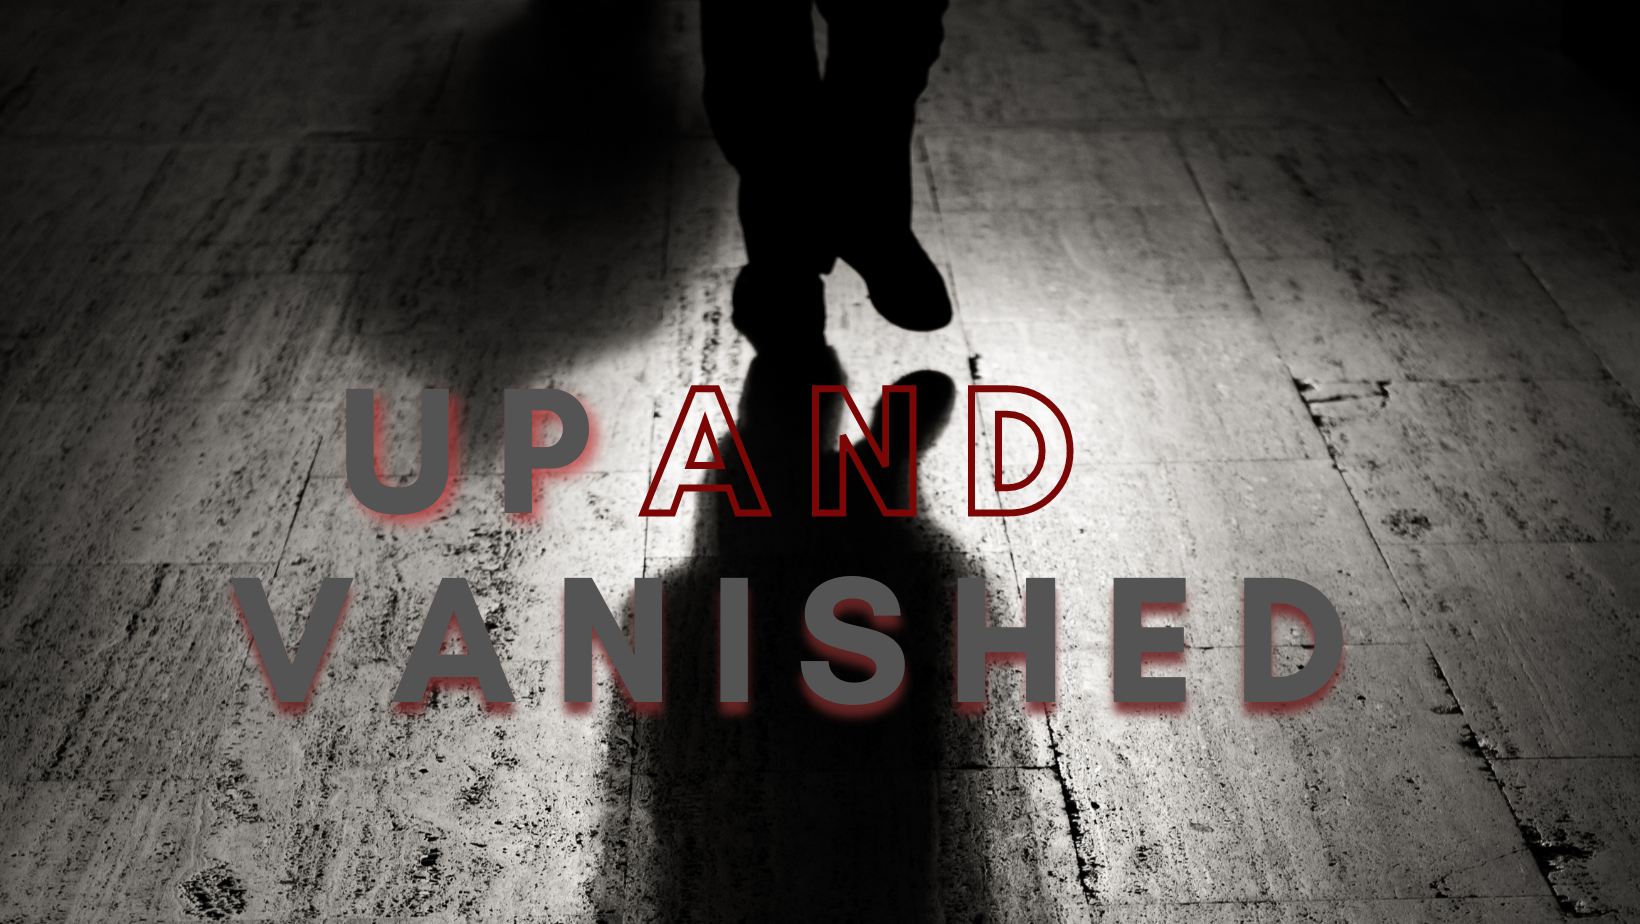 Up And Vanished Podcast – Listen Here